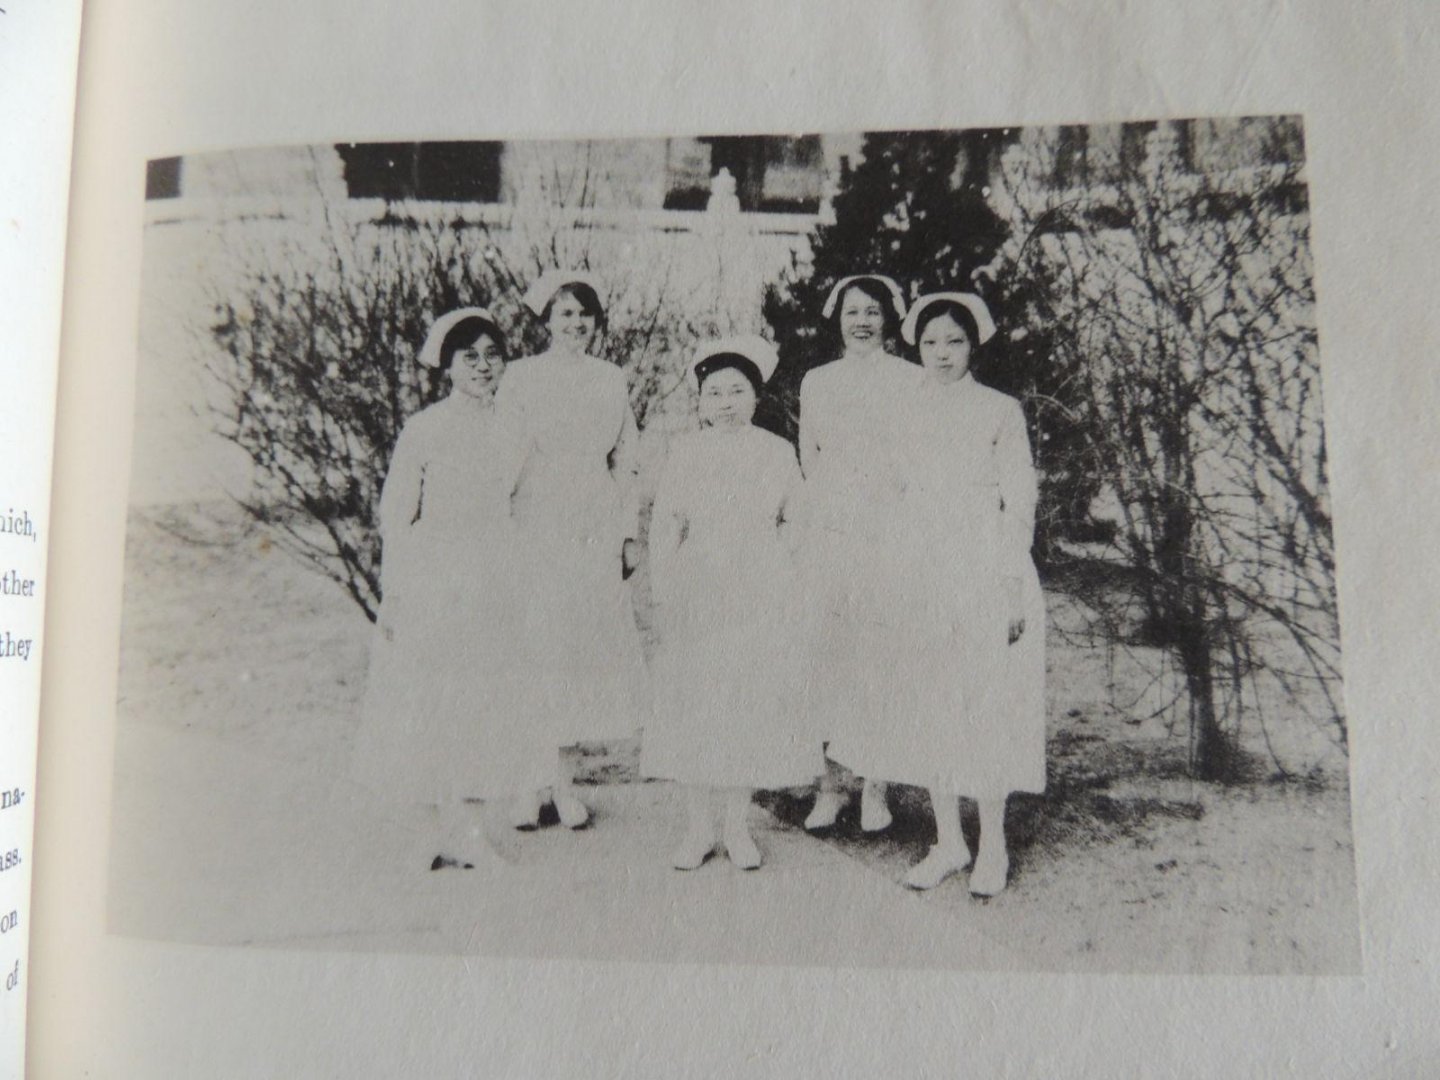 students of the Peking union Medical College Student Association - HOUGHTON,  LIANG,  HAWKINS,  ROCKEFELLER - Unison 1924